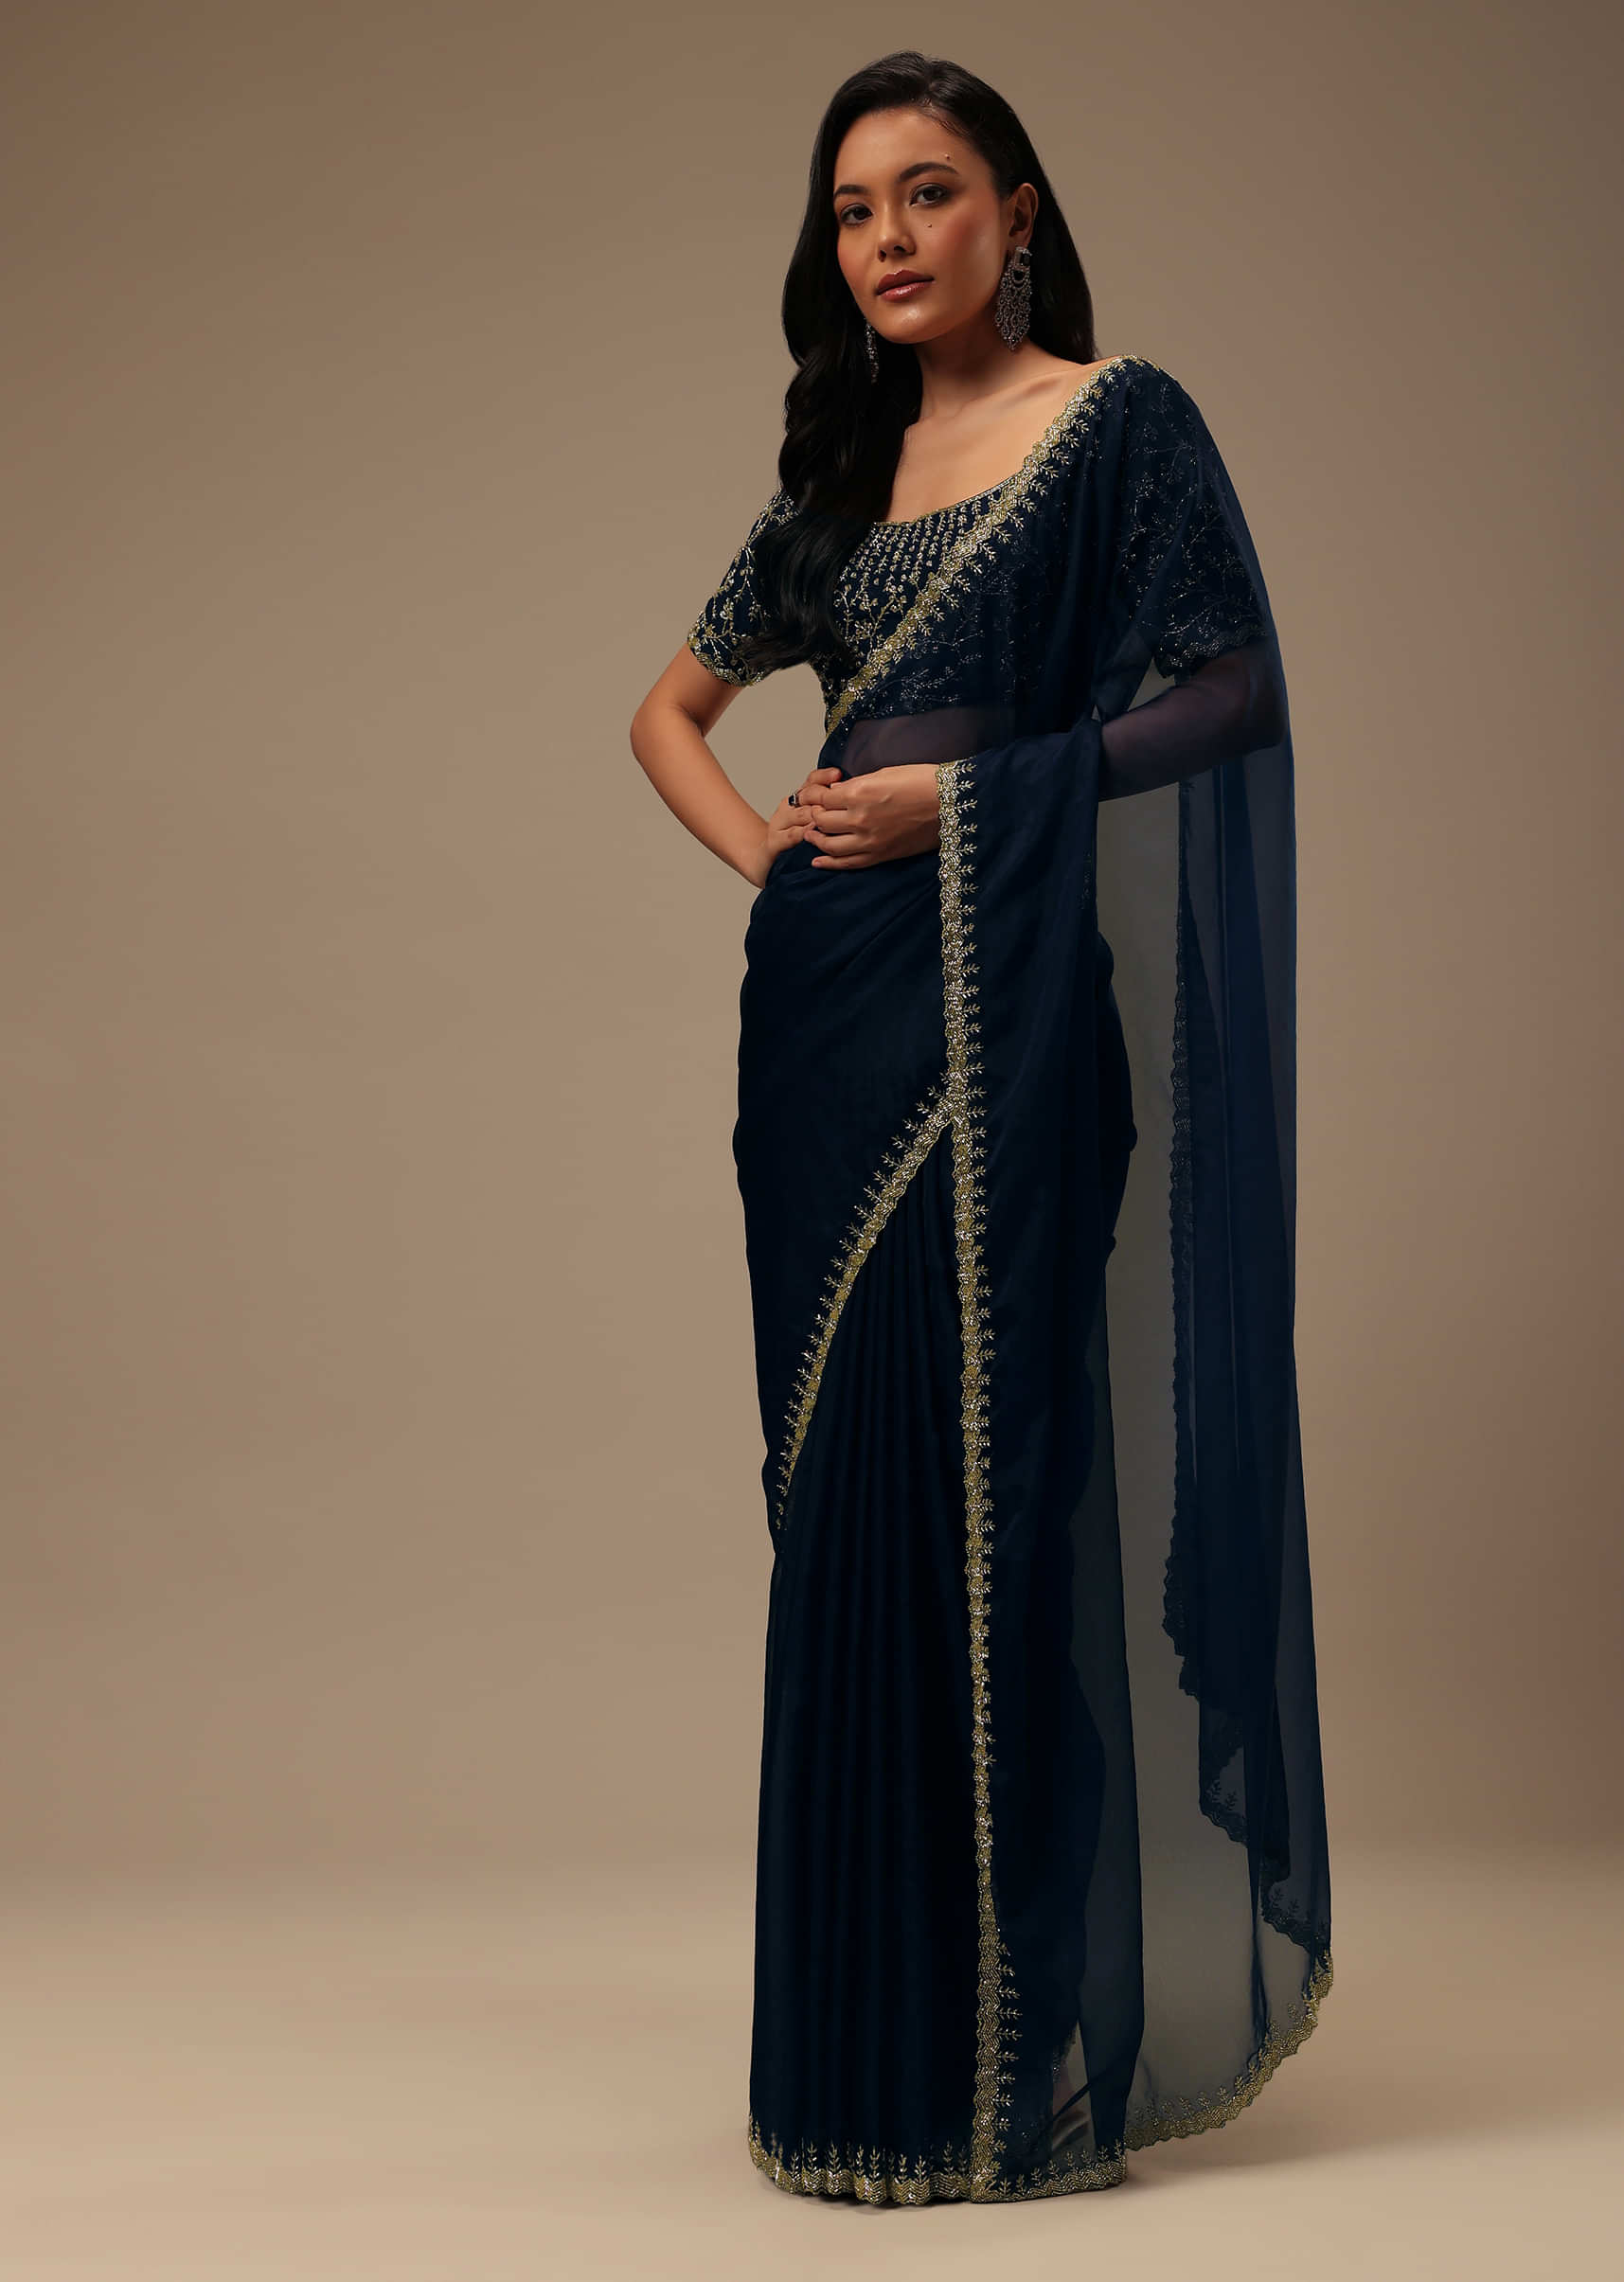 Saree: Shop Sari Online for Women at Best Price in Malaysia |  Andaazfashion.com.my